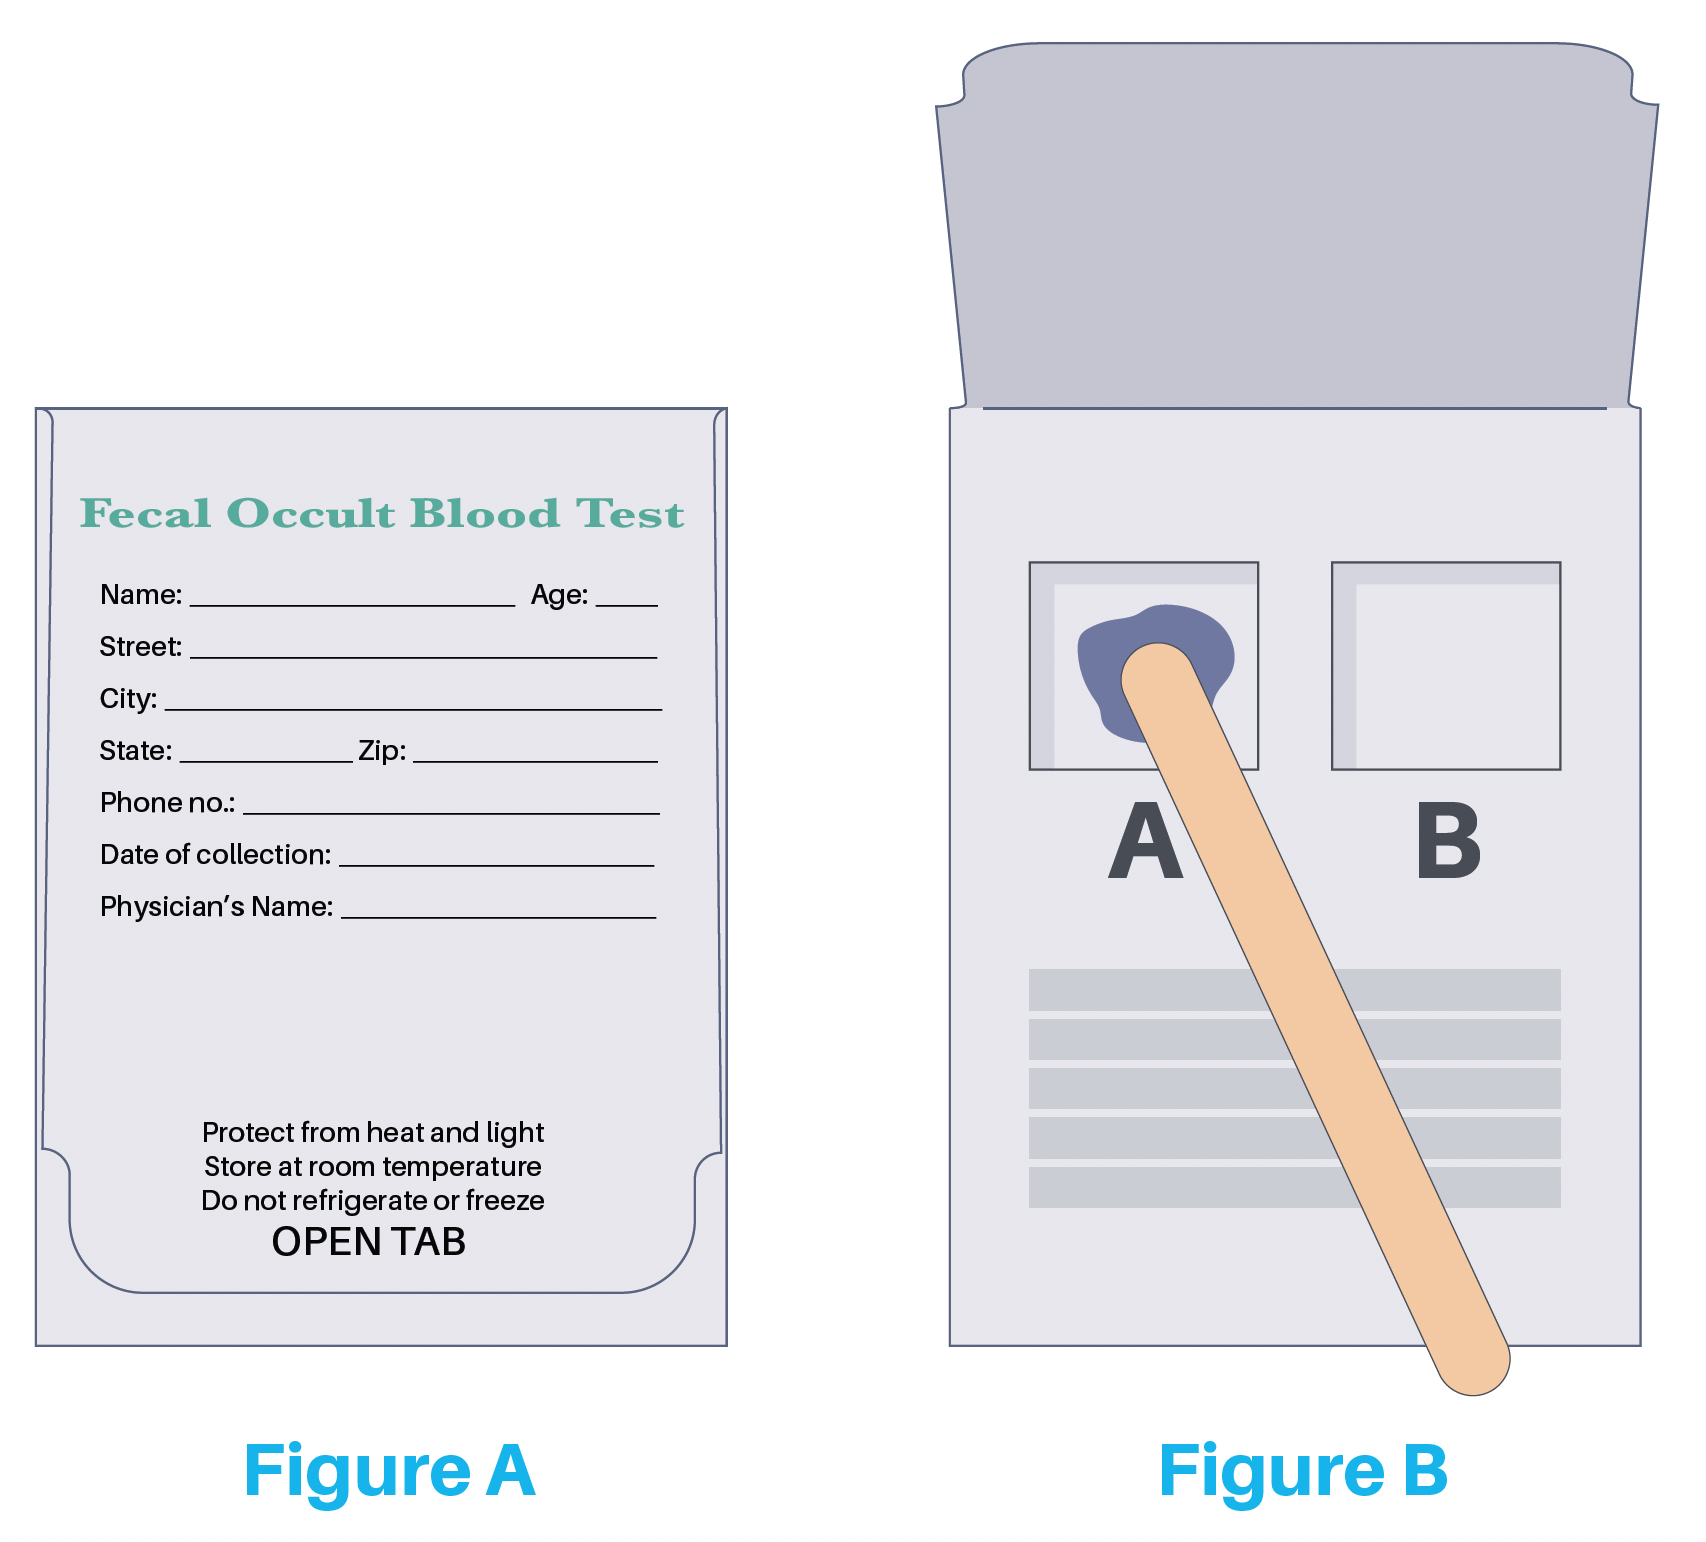 Fecal Occult Blood Test Figures (English)